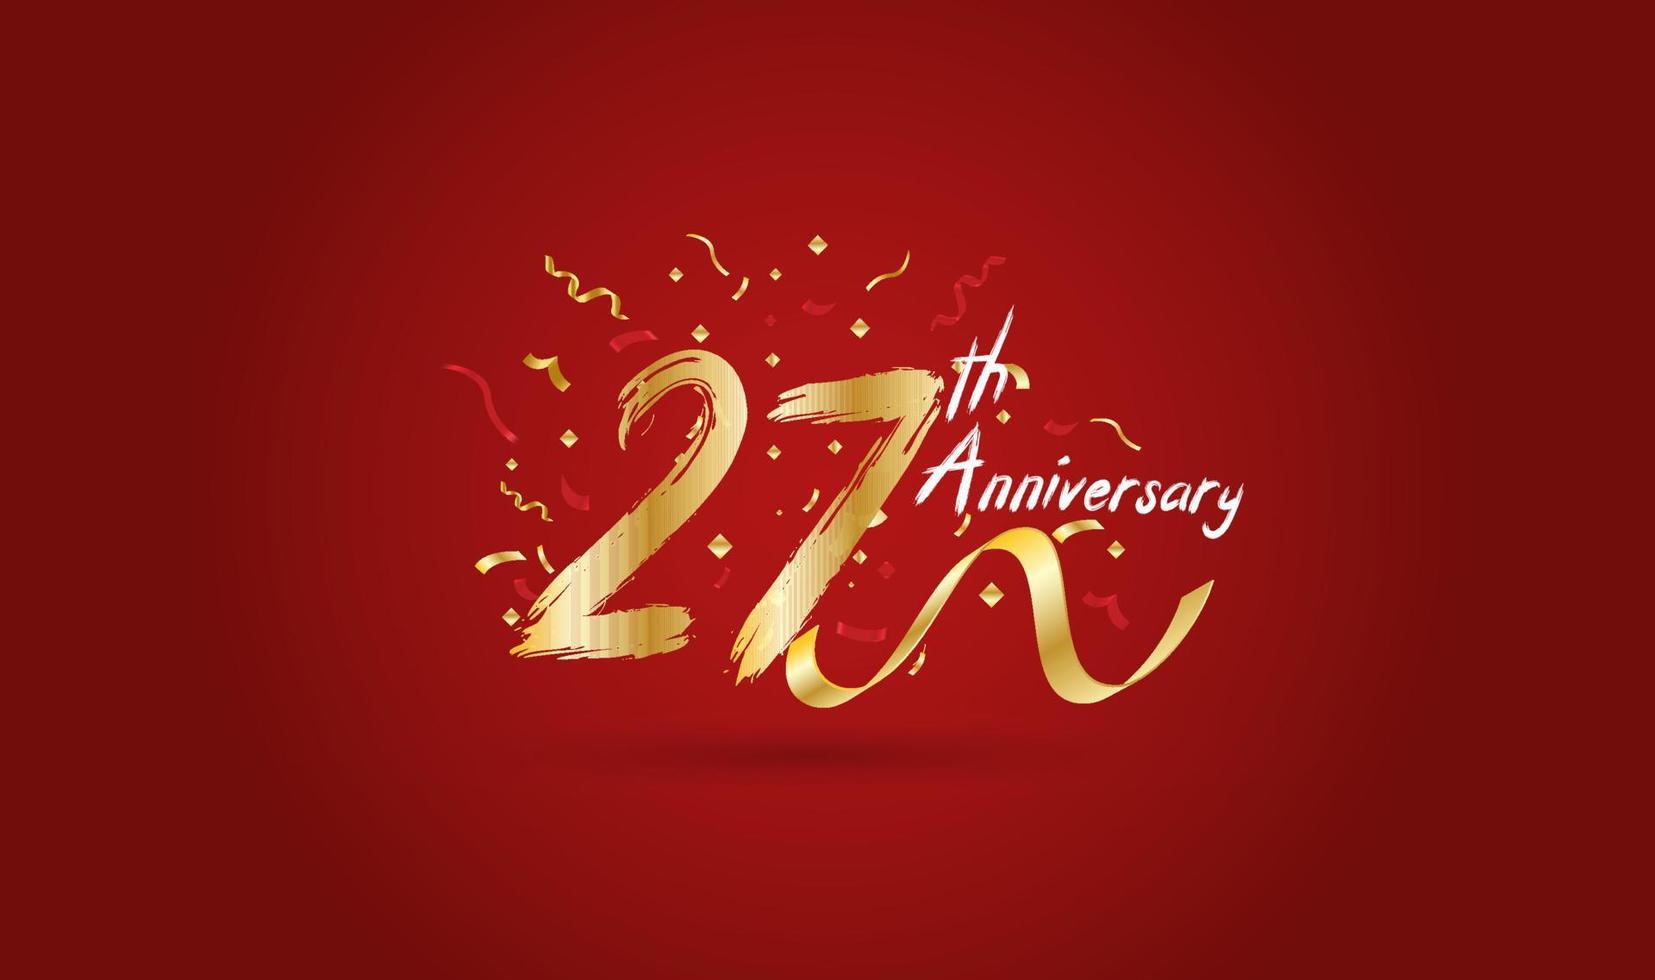 Anniversary celebration background. with the 27th number in gold and with the words golden anniversary celebration. vector